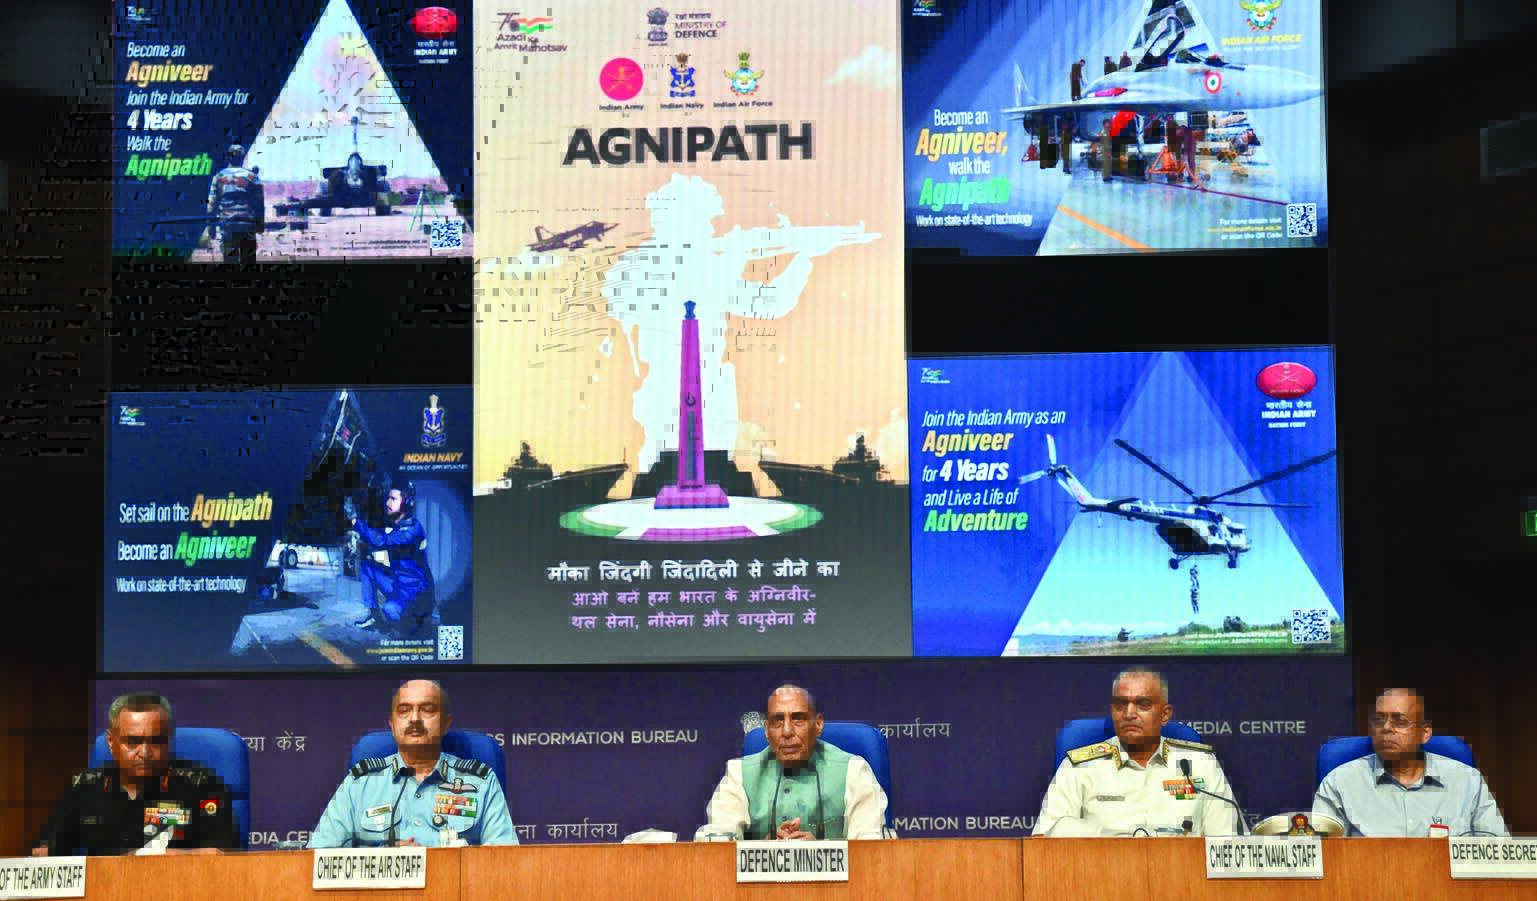 Agnipath: Govt unveils radical changes in recruitment of soldiers